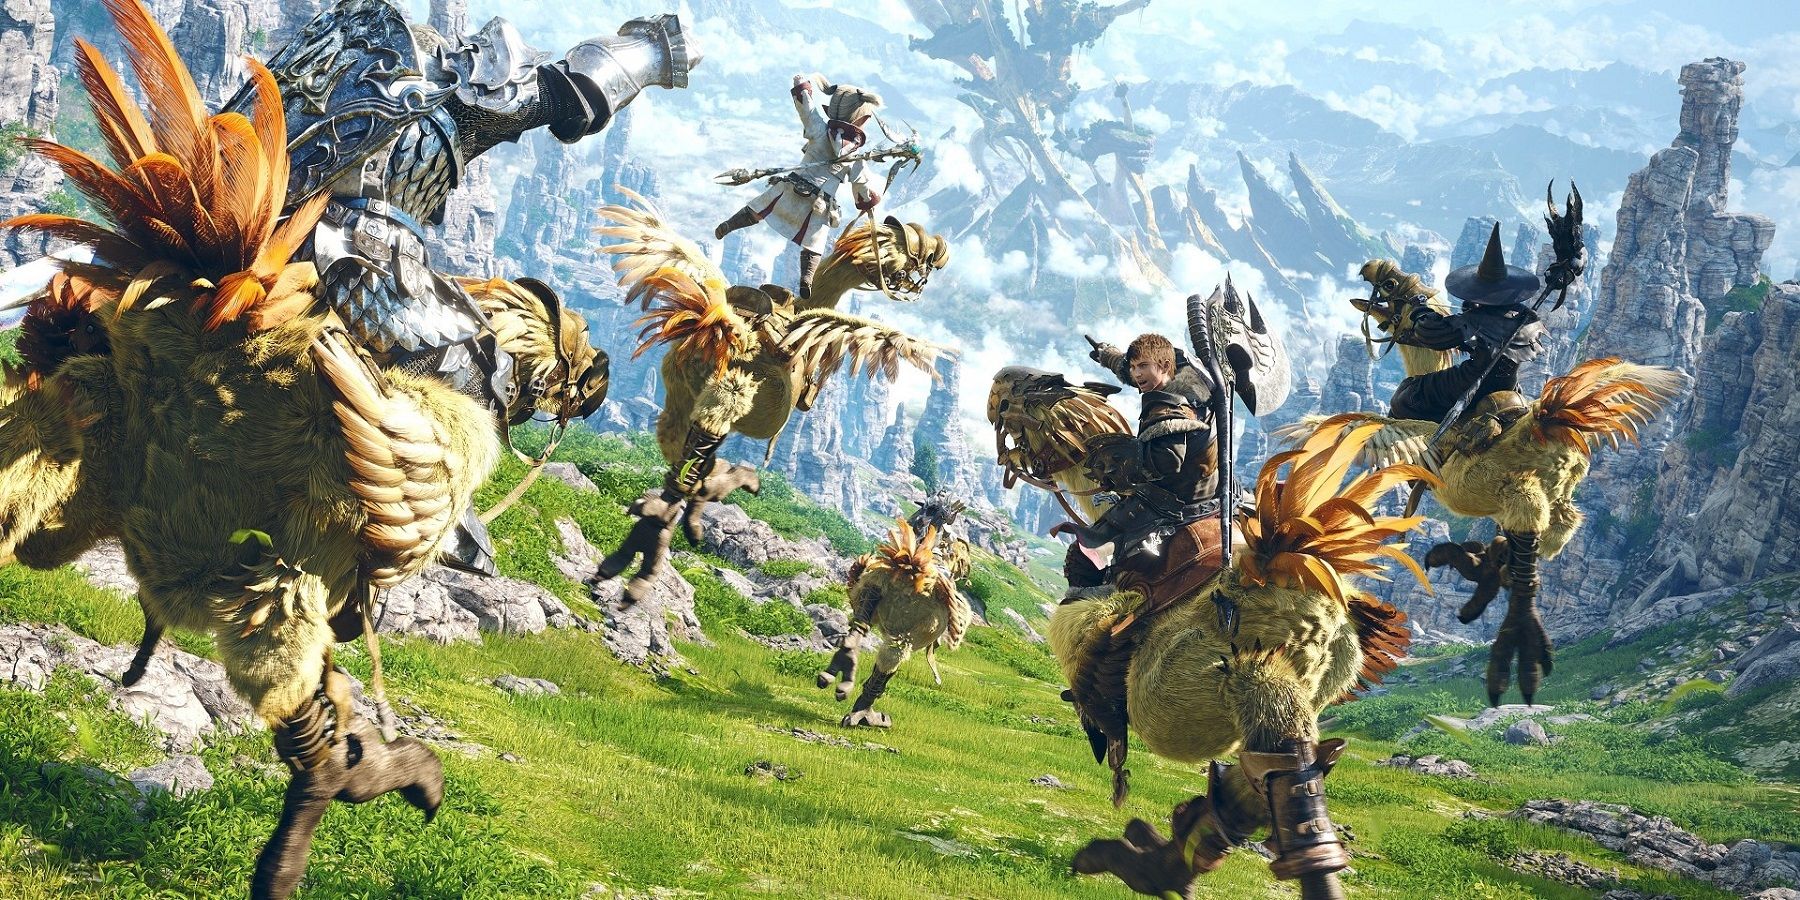 Final Fantasy 14 Shoe Line Coming From Puma - IGN